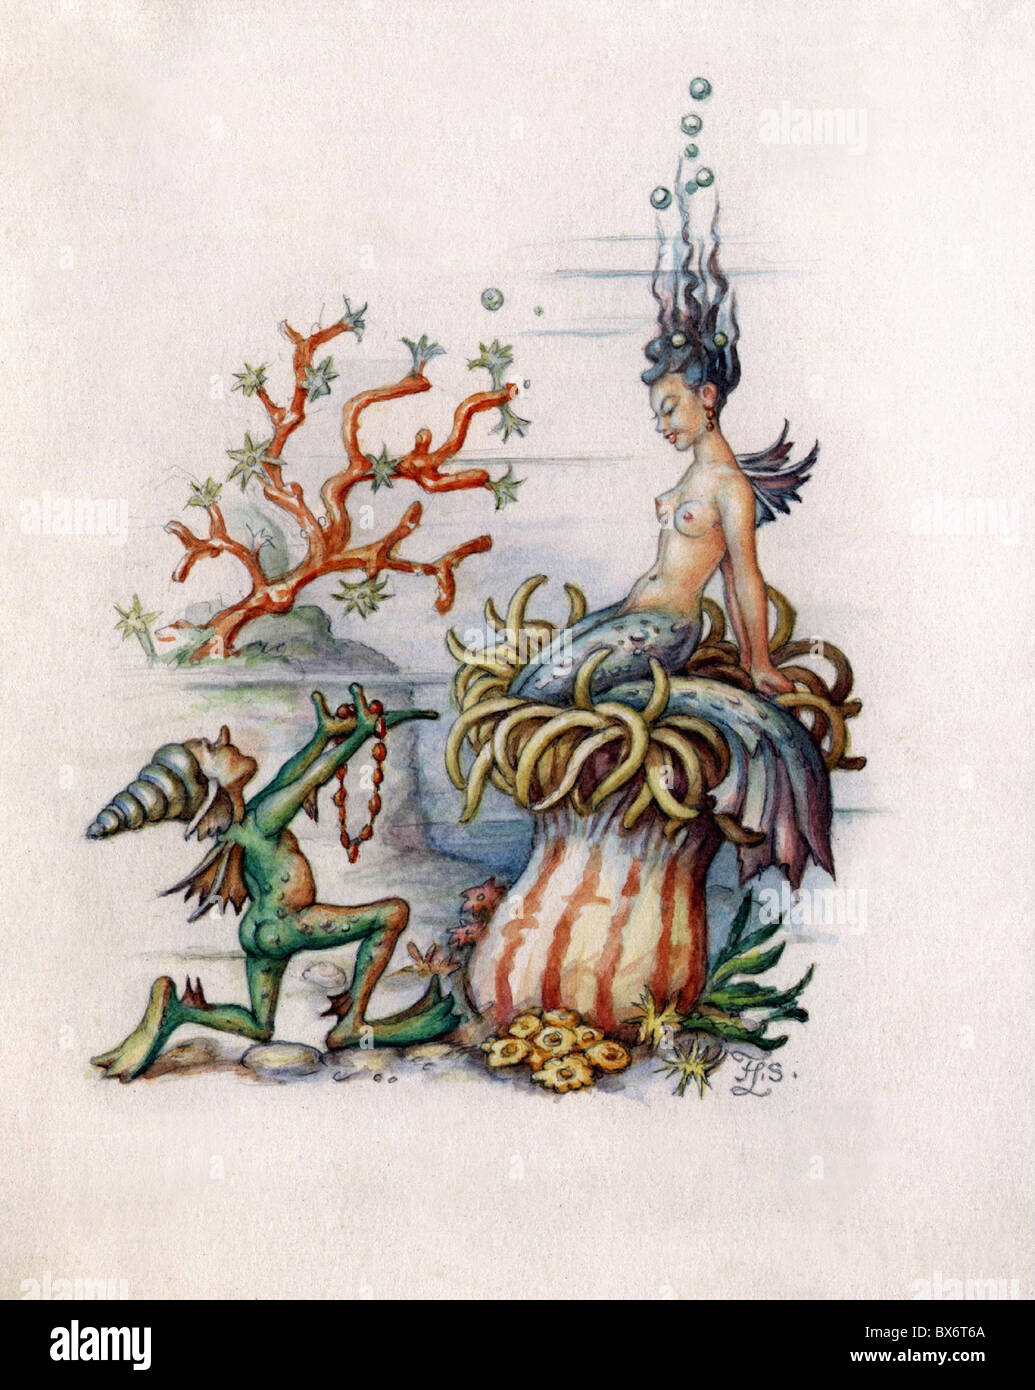 literature, fairytales, underwater creature, coloured drawing by F. L. S., historic, historical, legend, legends, mermaid, mermaids, merman, the Nix, mermen, gift, gifts, anemone, anemones, fantasy, Additional-Rights-Clearences-Not Available Stock Photo